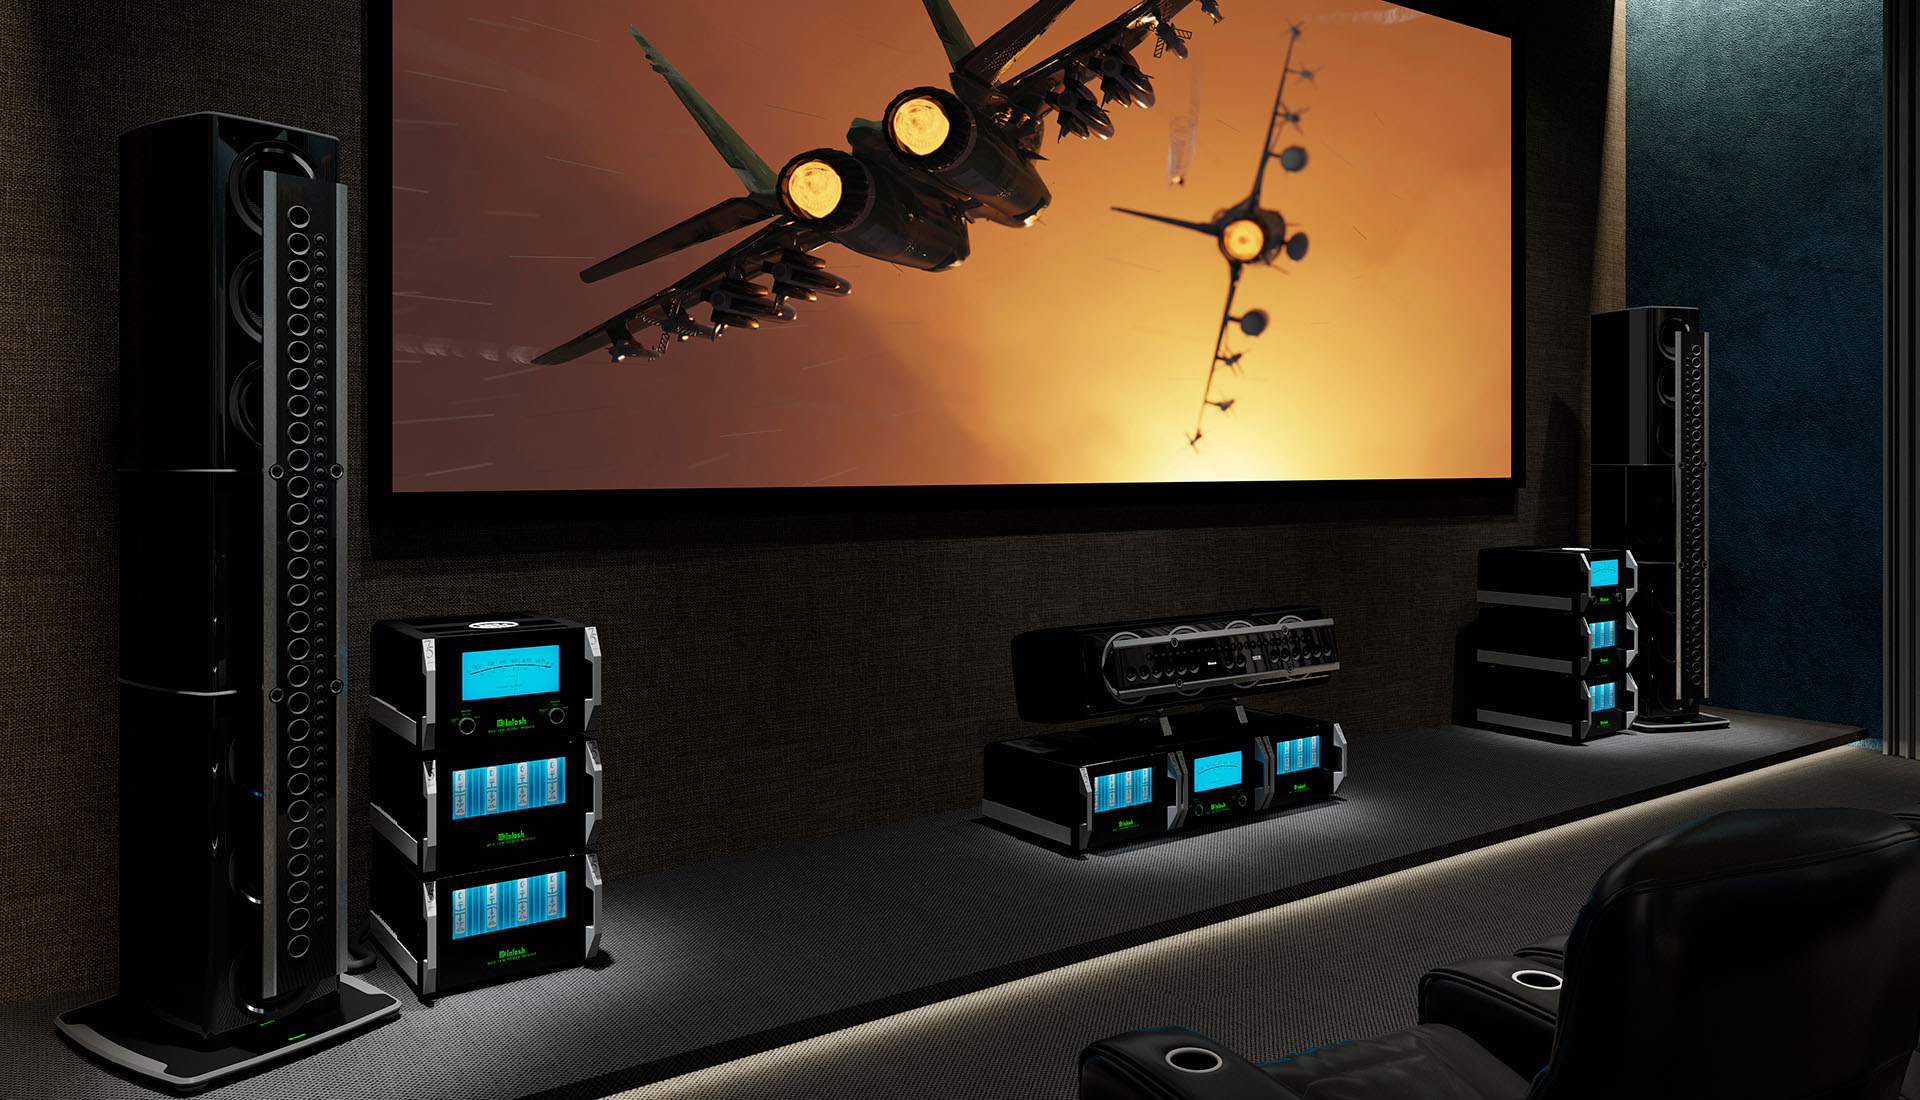 McIntosh Reference home theater system